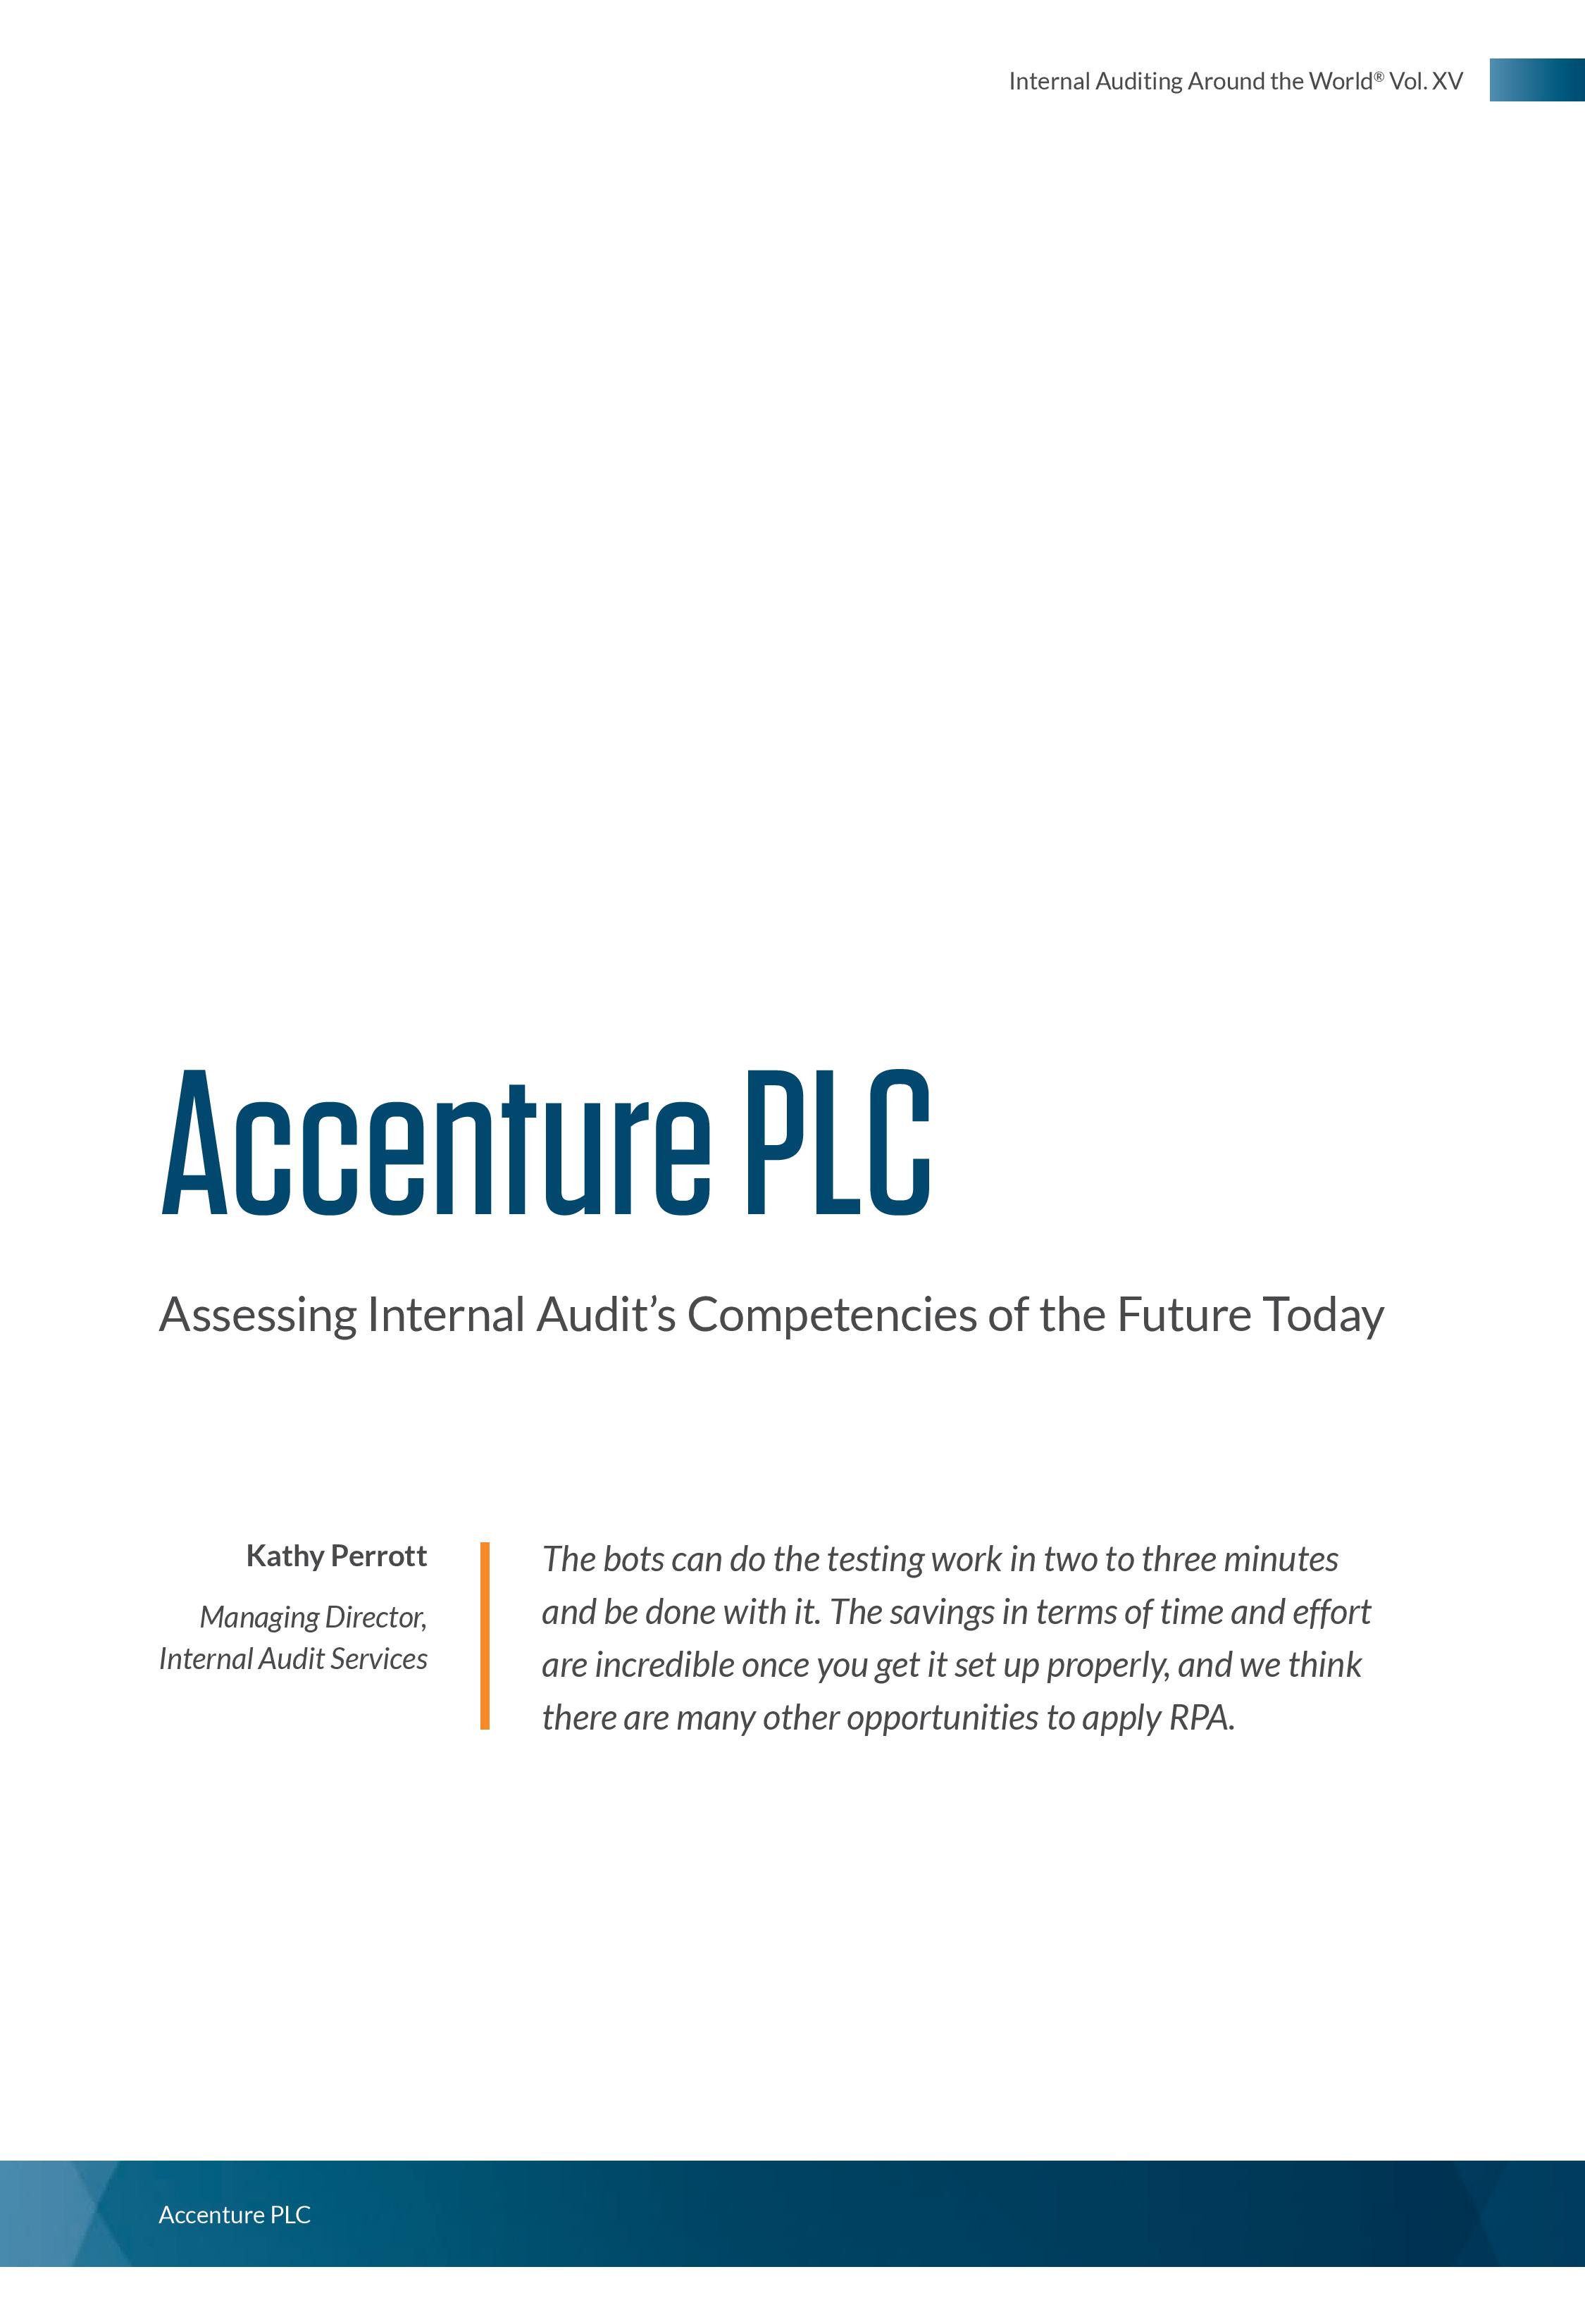 Screenshot of the first page of Accenture PLC Assessing Internal Audit’s Competencies of the Future Today